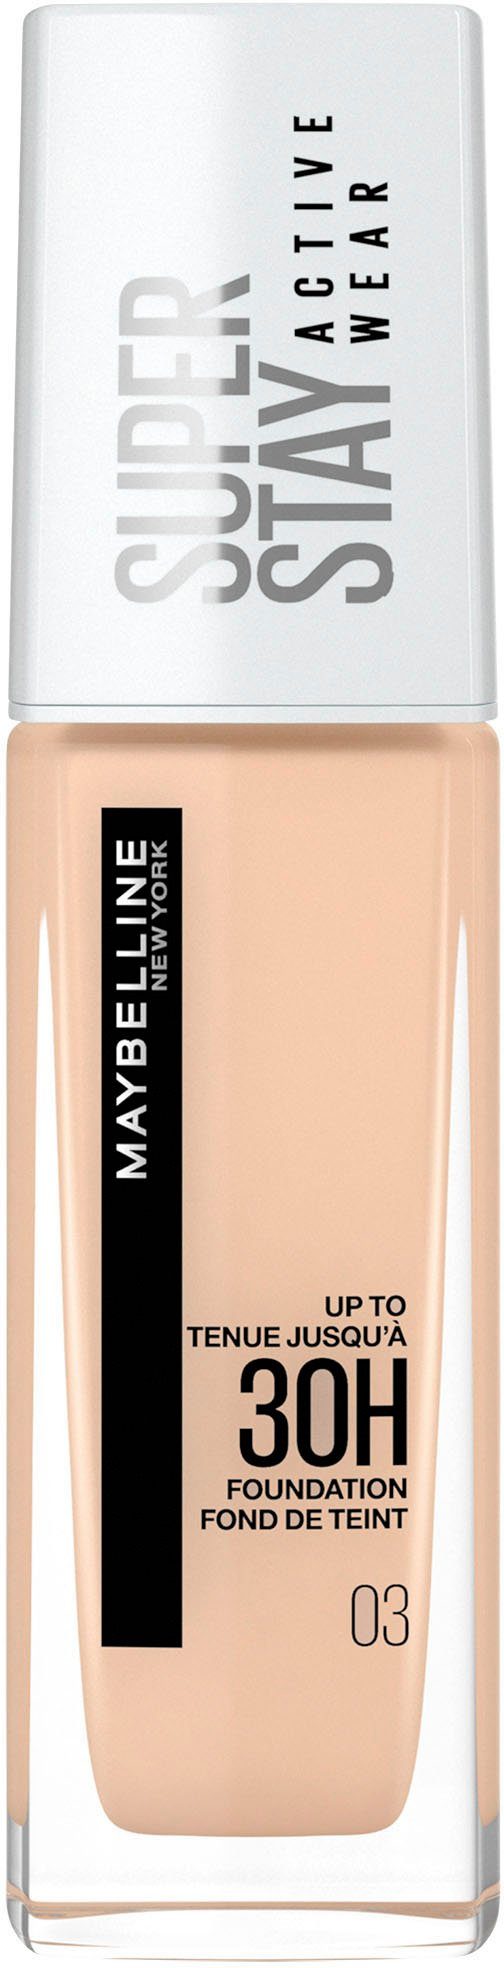 MAYBELLINE NEW YORK Foundation Super Stay Ivory 3 True Active Wear